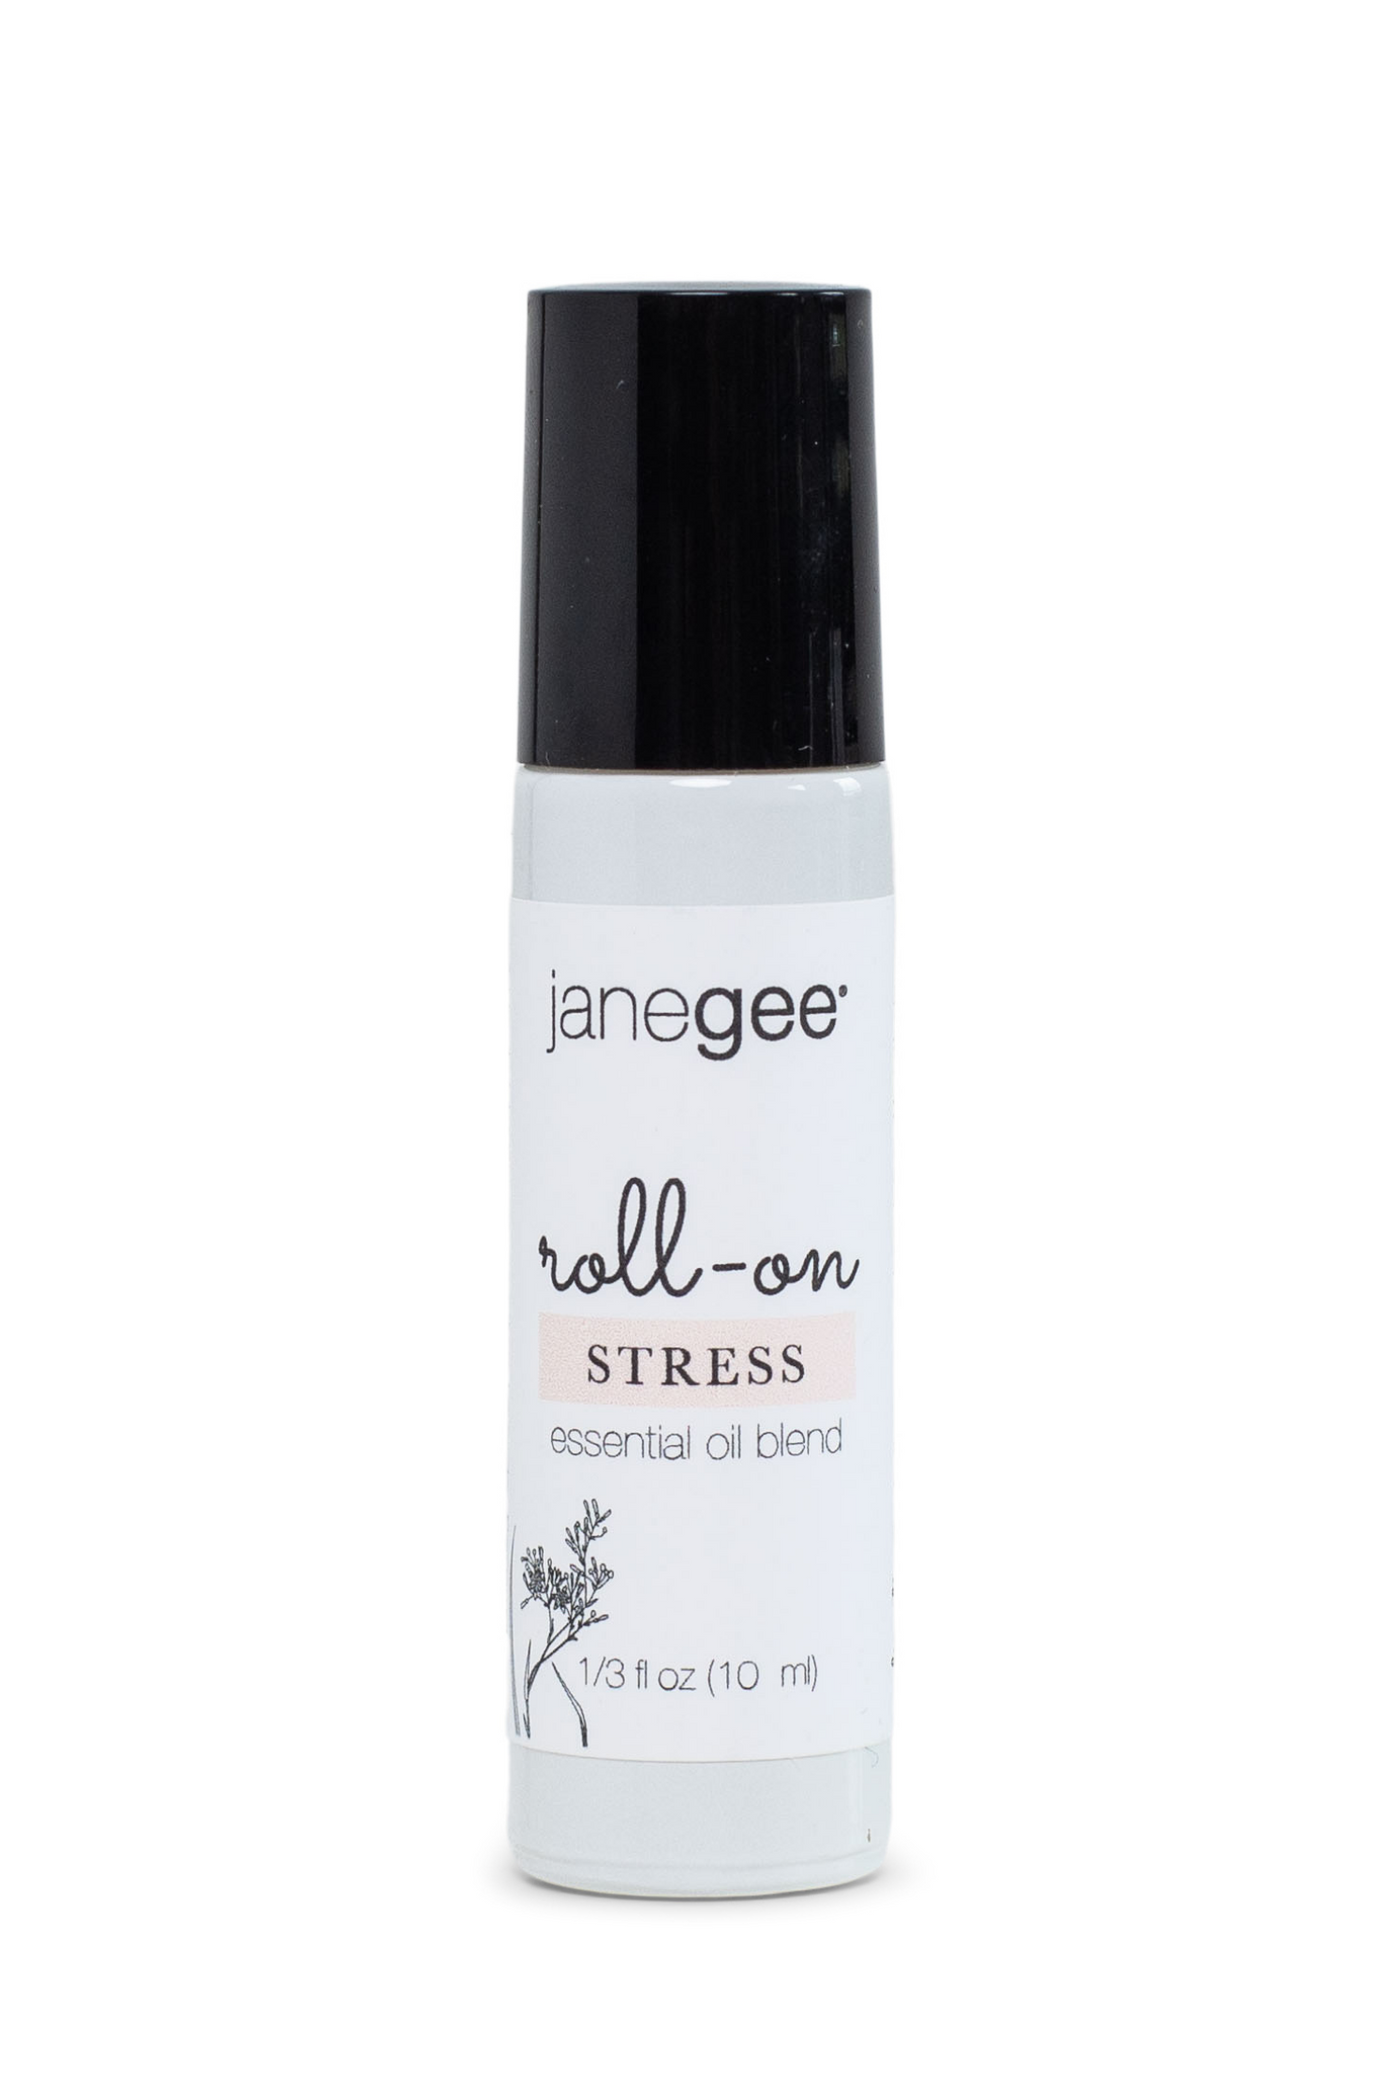 janegee Stress Aromatherapy Roll-On